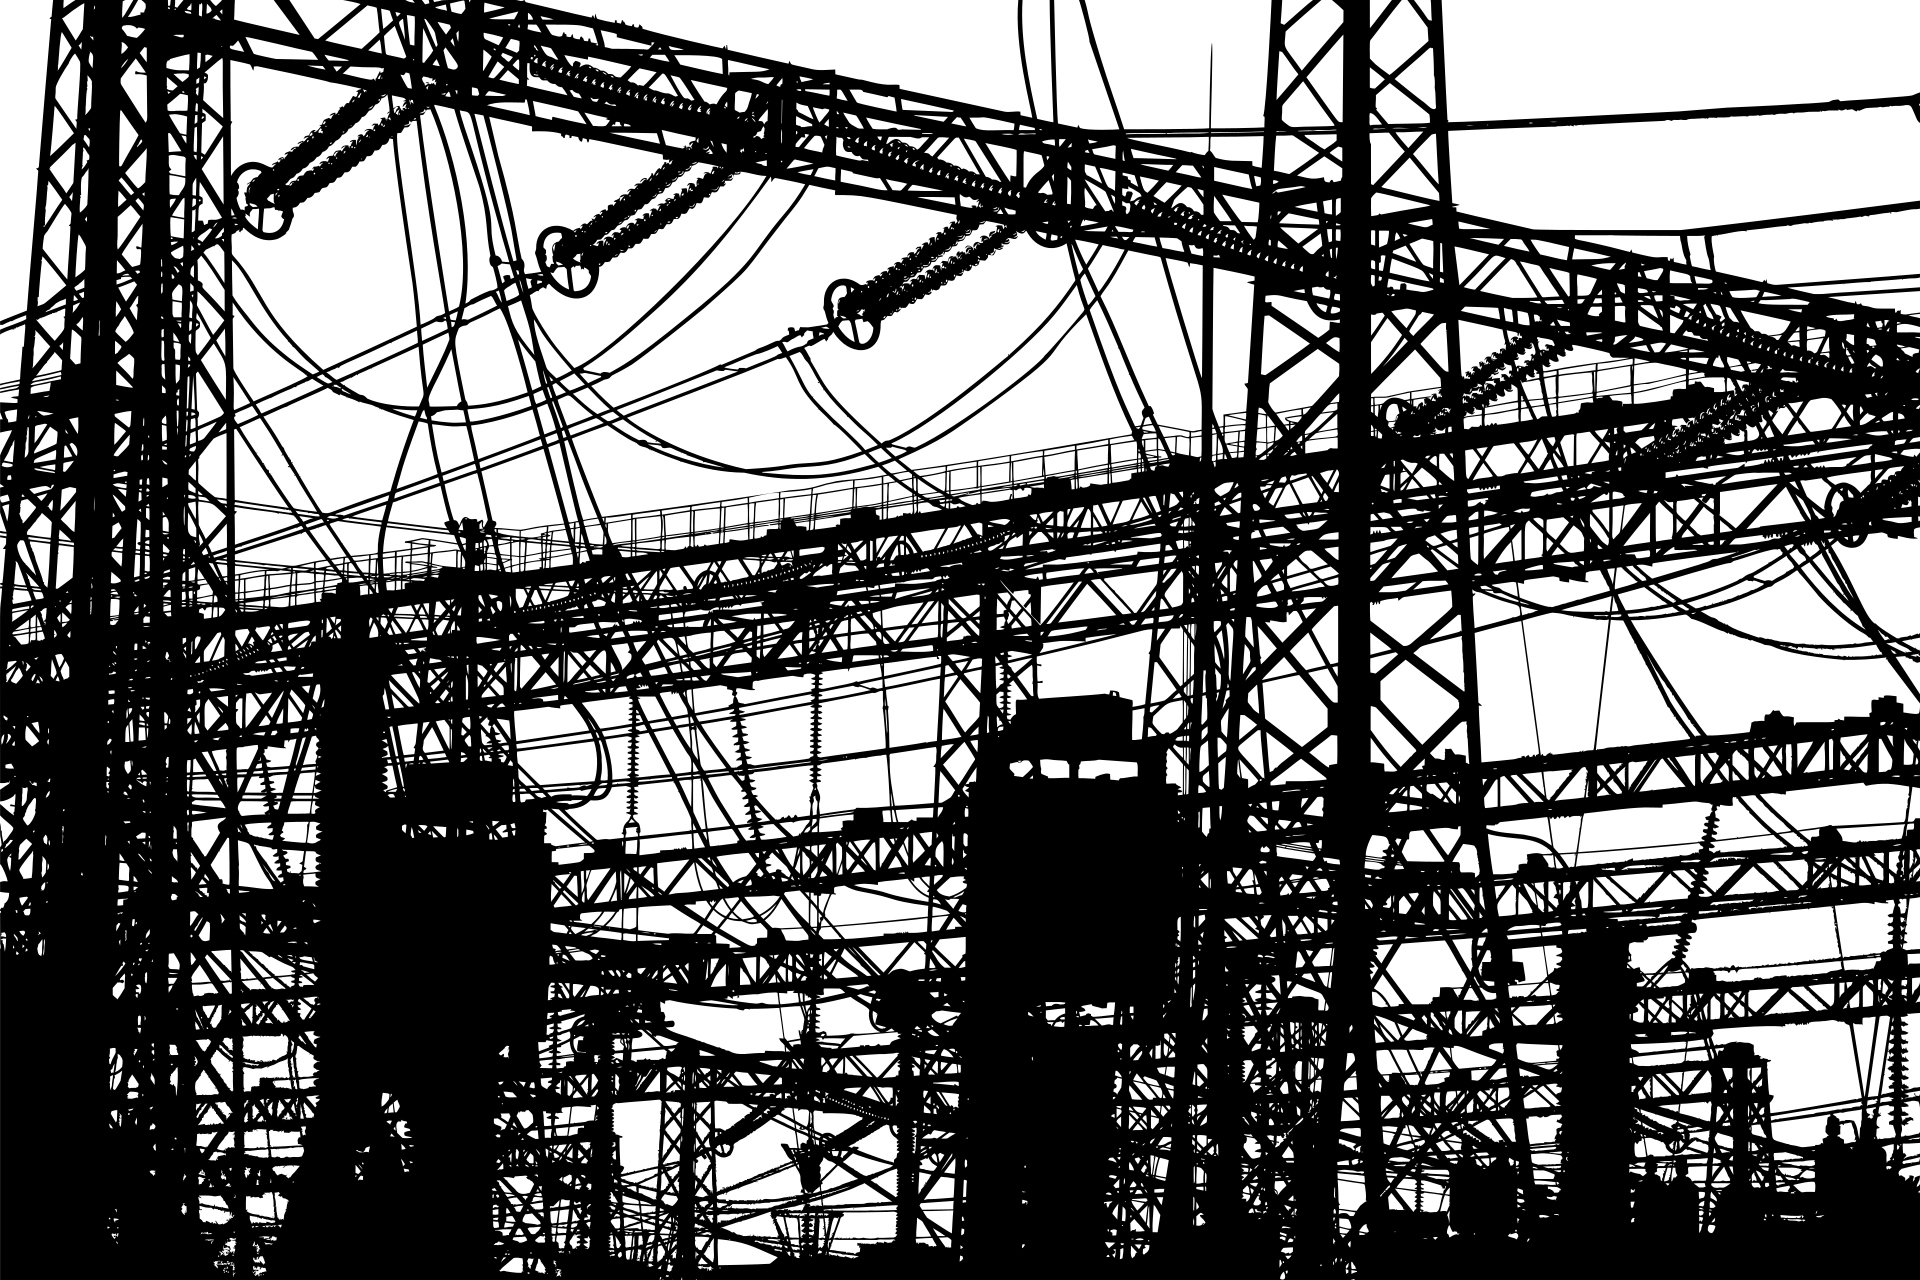  Revised K'taka Power Tariff From June Bills; Forced To Implement Hike, Says Besc-TeluguStop.com